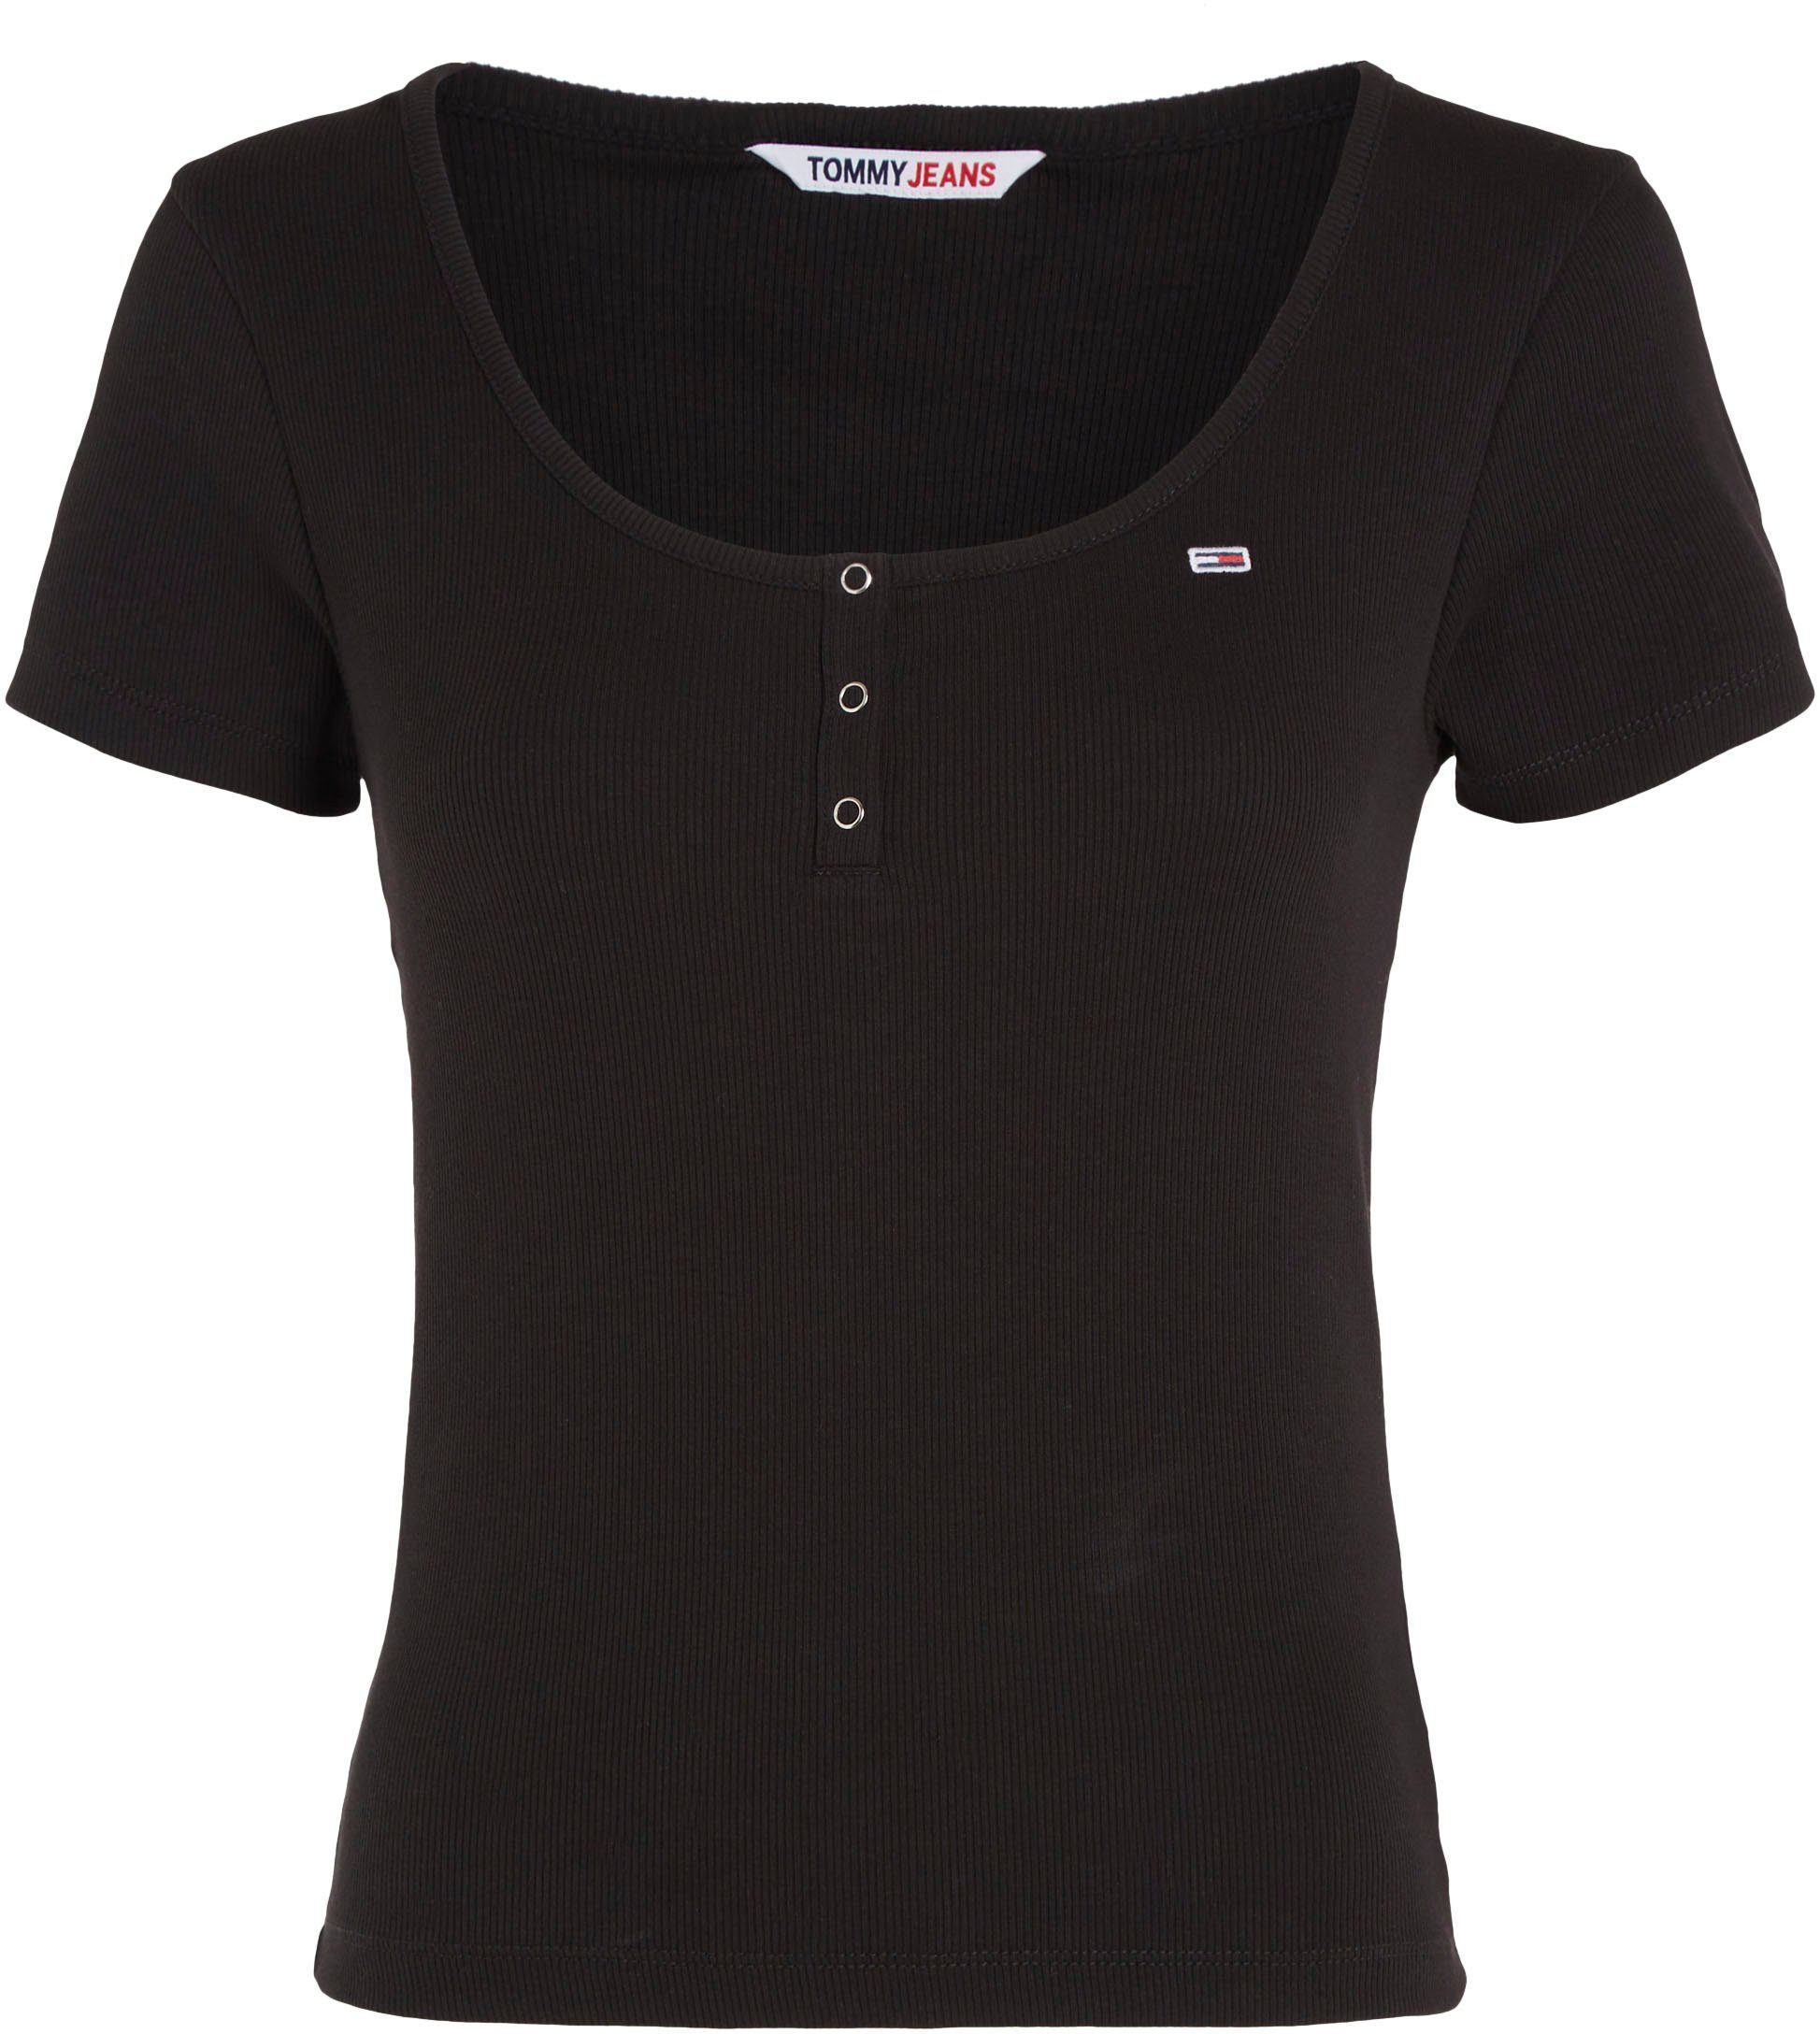 Jeans Jeans T-Shirt Tommy C-NECK Tommy BBY BUTTON Logostickerei RIB Black TJW mit